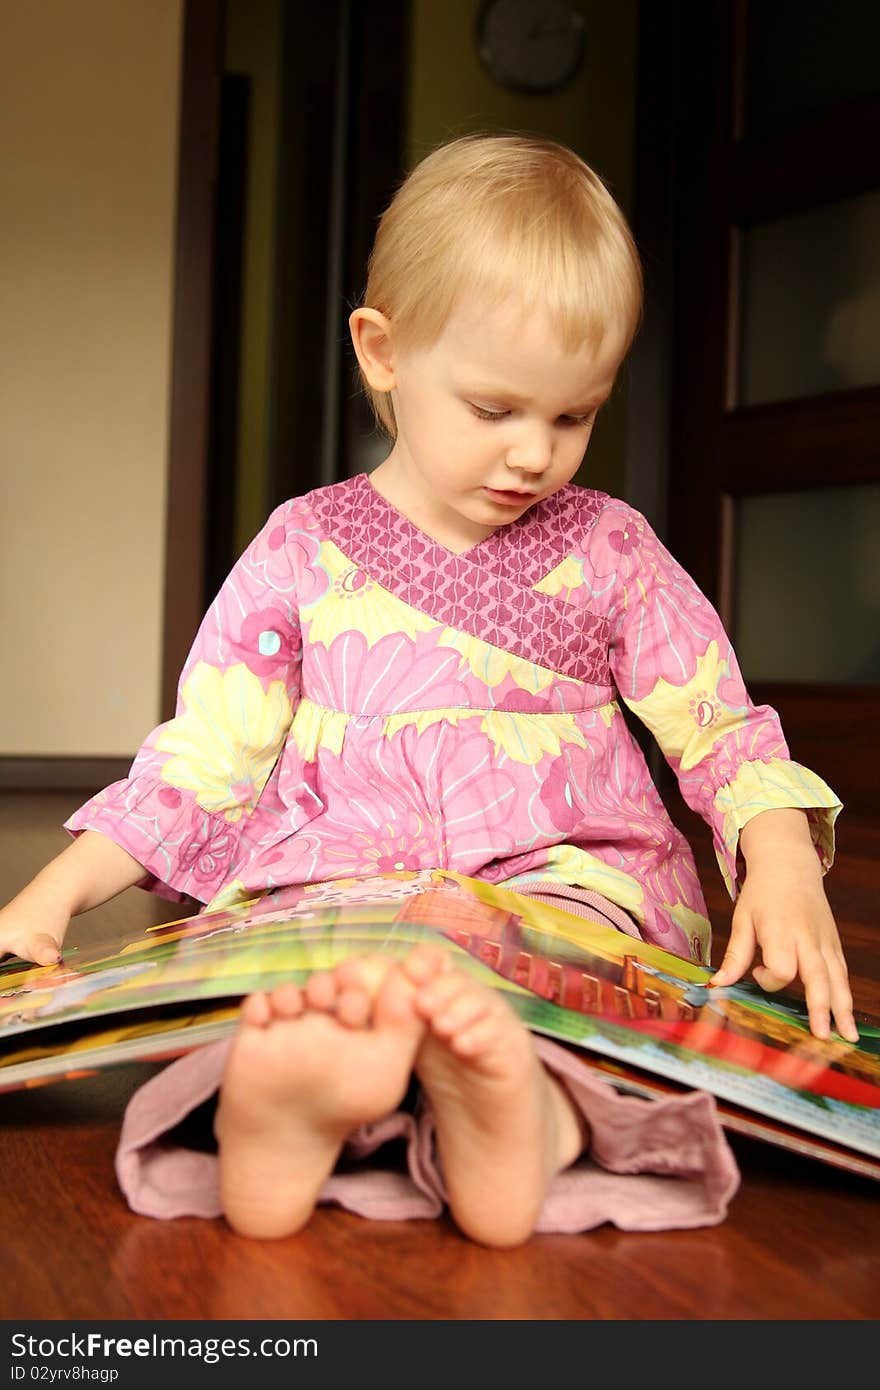 2 years old girl reading or browse through pop-up book. 2 years old girl reading or browse through pop-up book.